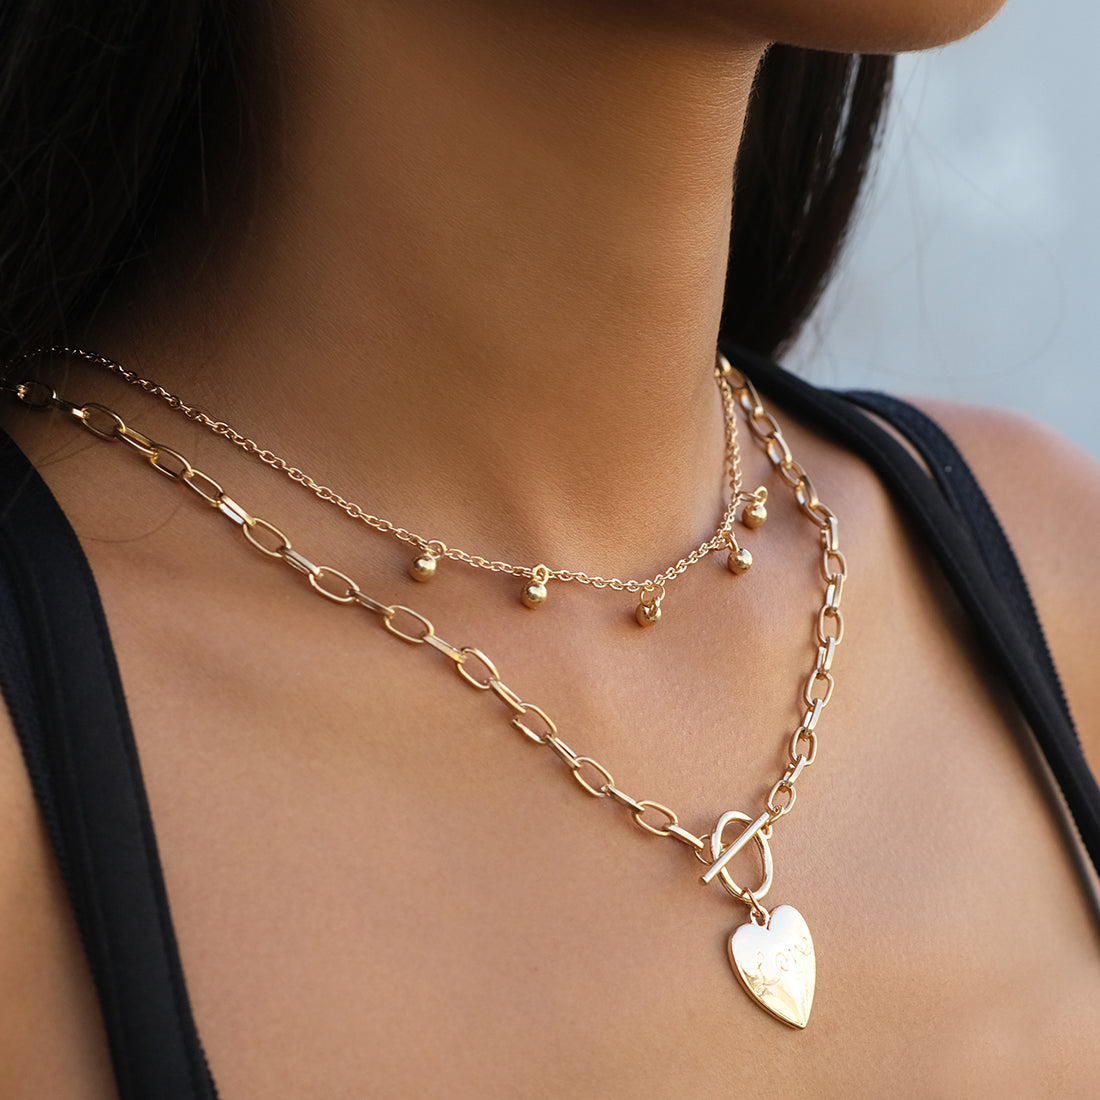 HEART LOVE & BEADED DAINTY CHARMS GOLD-TONED CHAIN LINK LAYERED NECKLACE